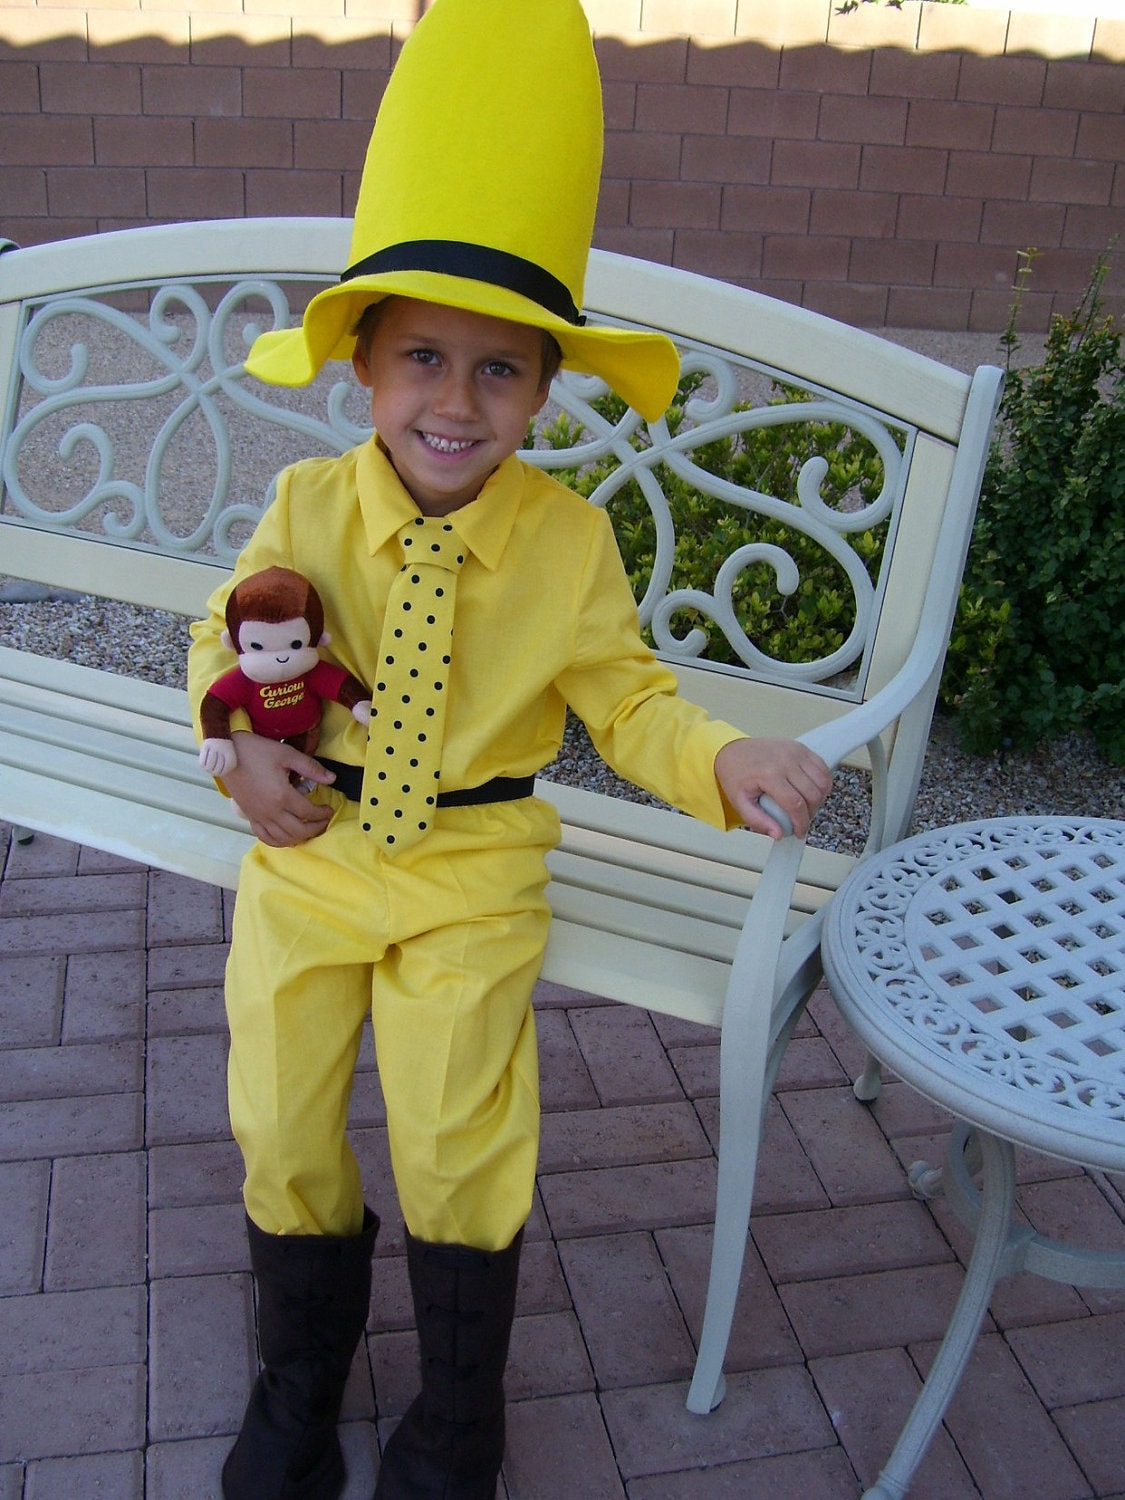 Man with the yellow hat costume